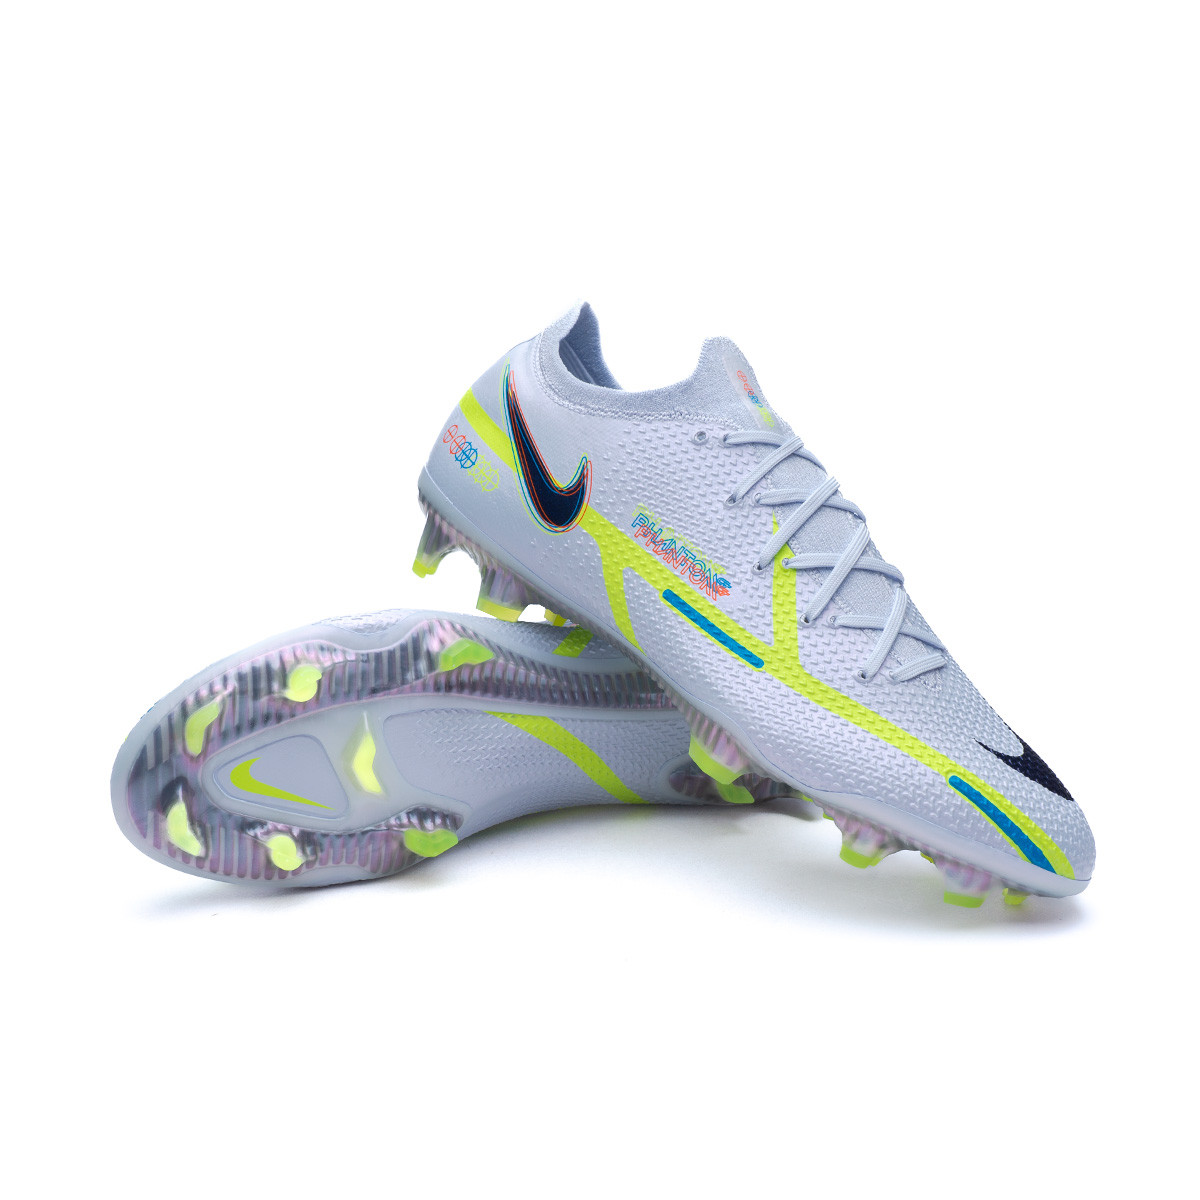 Nike Phantom GT2 Dynamic Fit Elite FG Firm-Ground Soccer Cleats | lupon ...